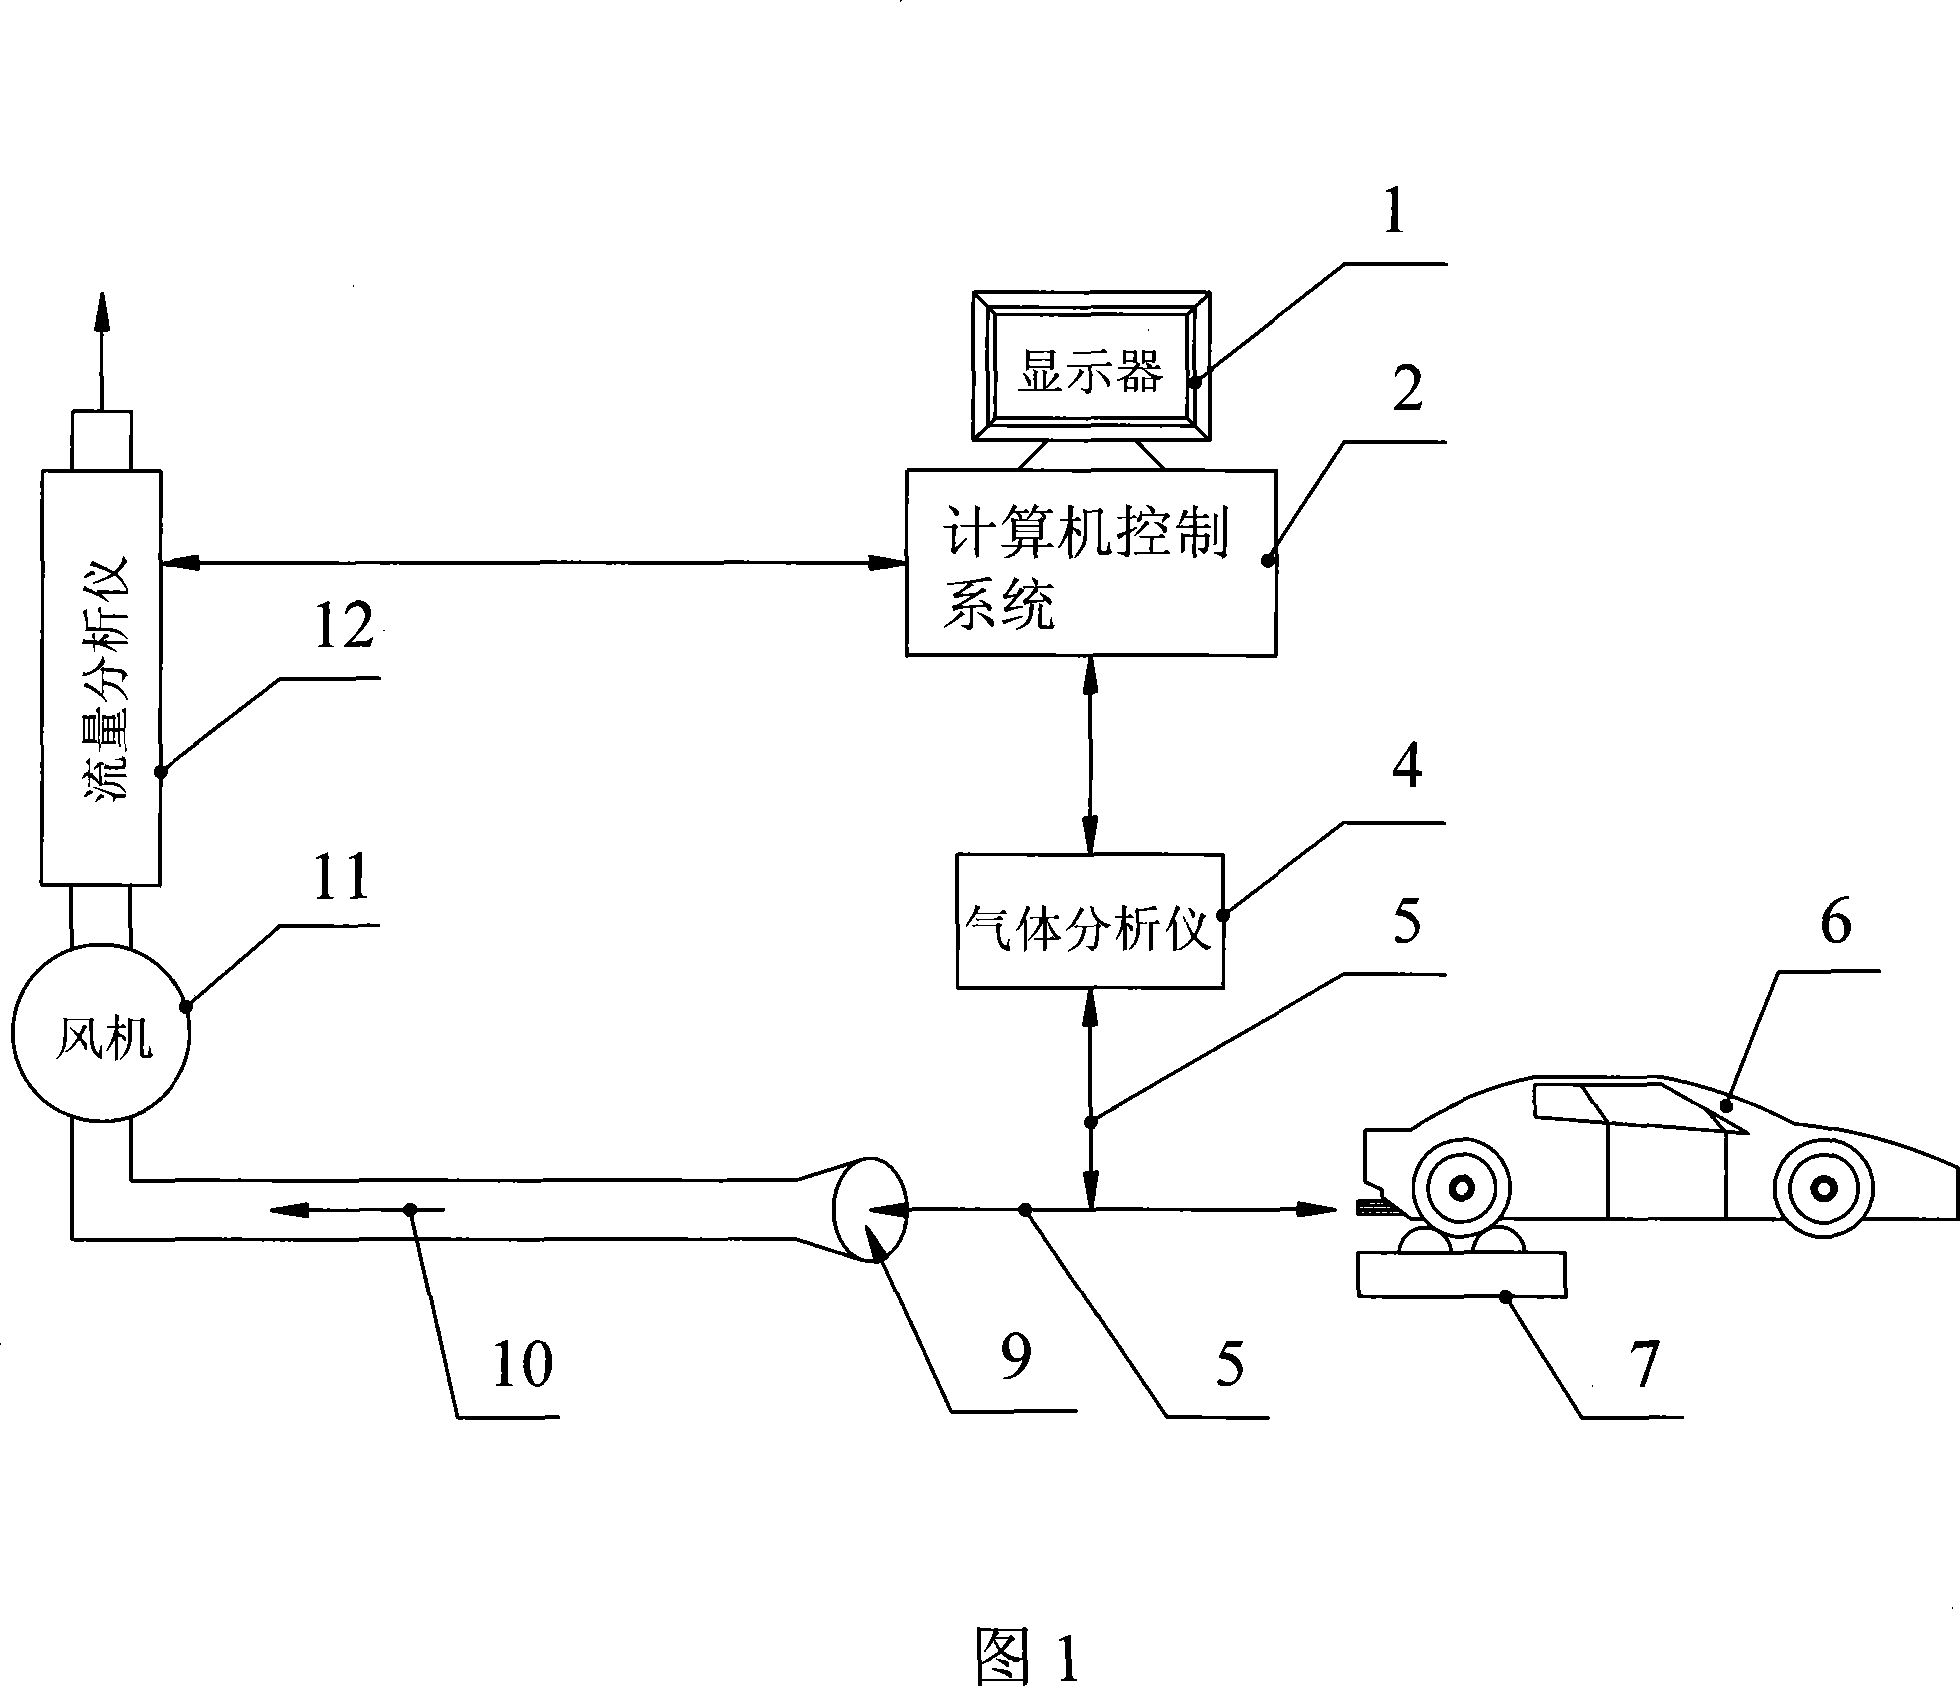 Method for computing motor-vehicle exhaust quality by No diluting